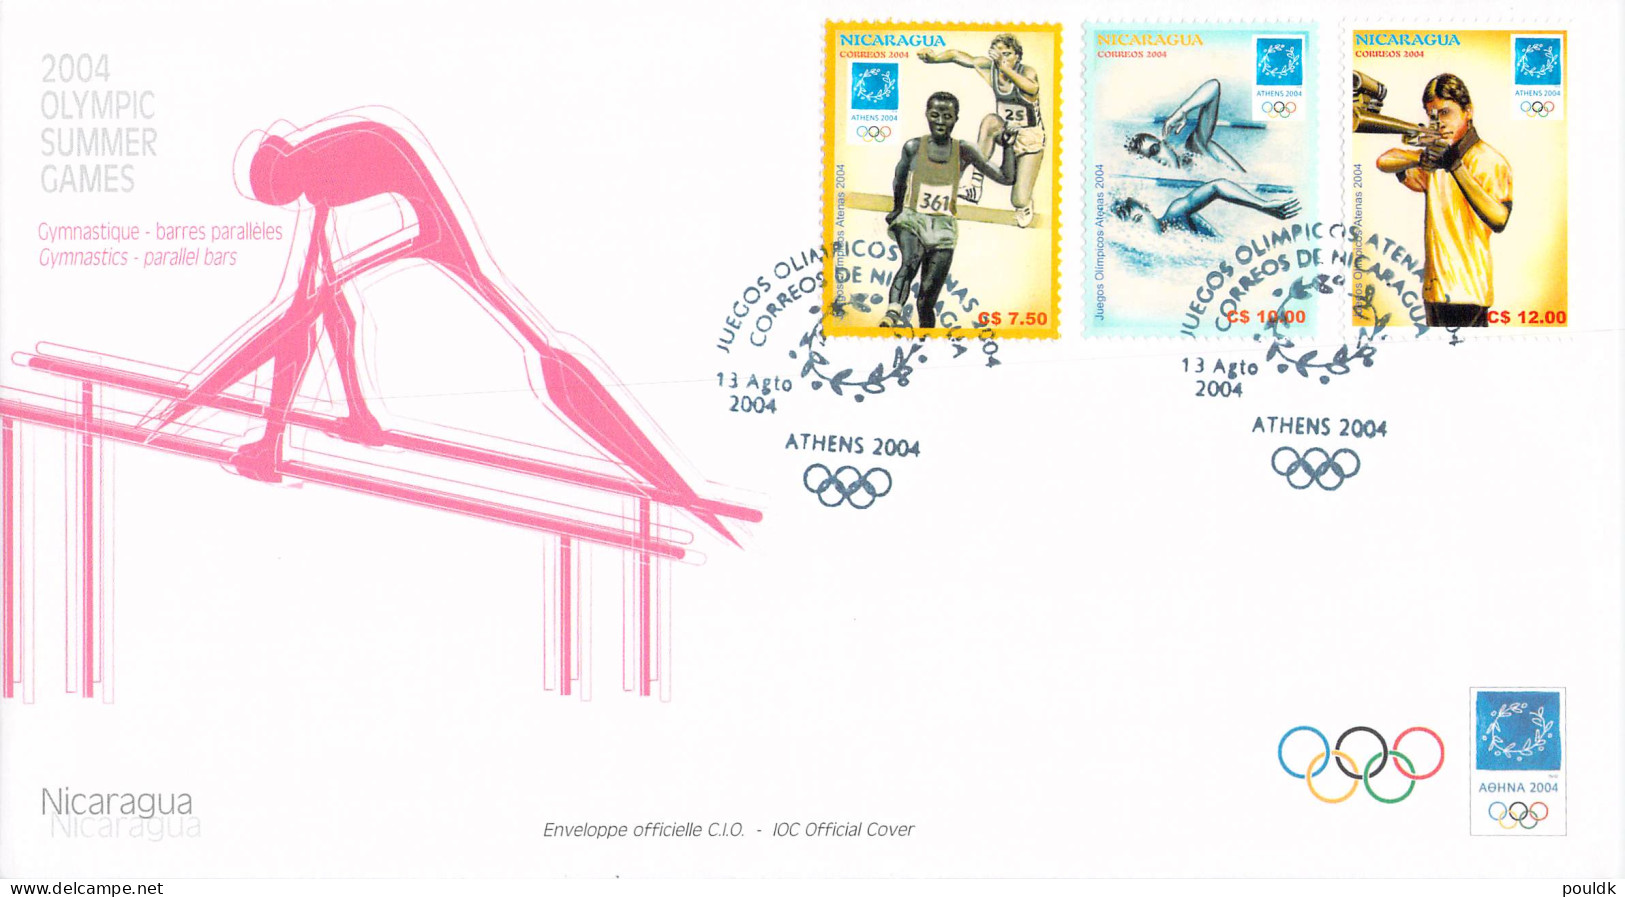 Olympic Games in Athens 2004 - ten covers, looks like FDC. Postal weight approx 0,09 kg. Please read Sales Con